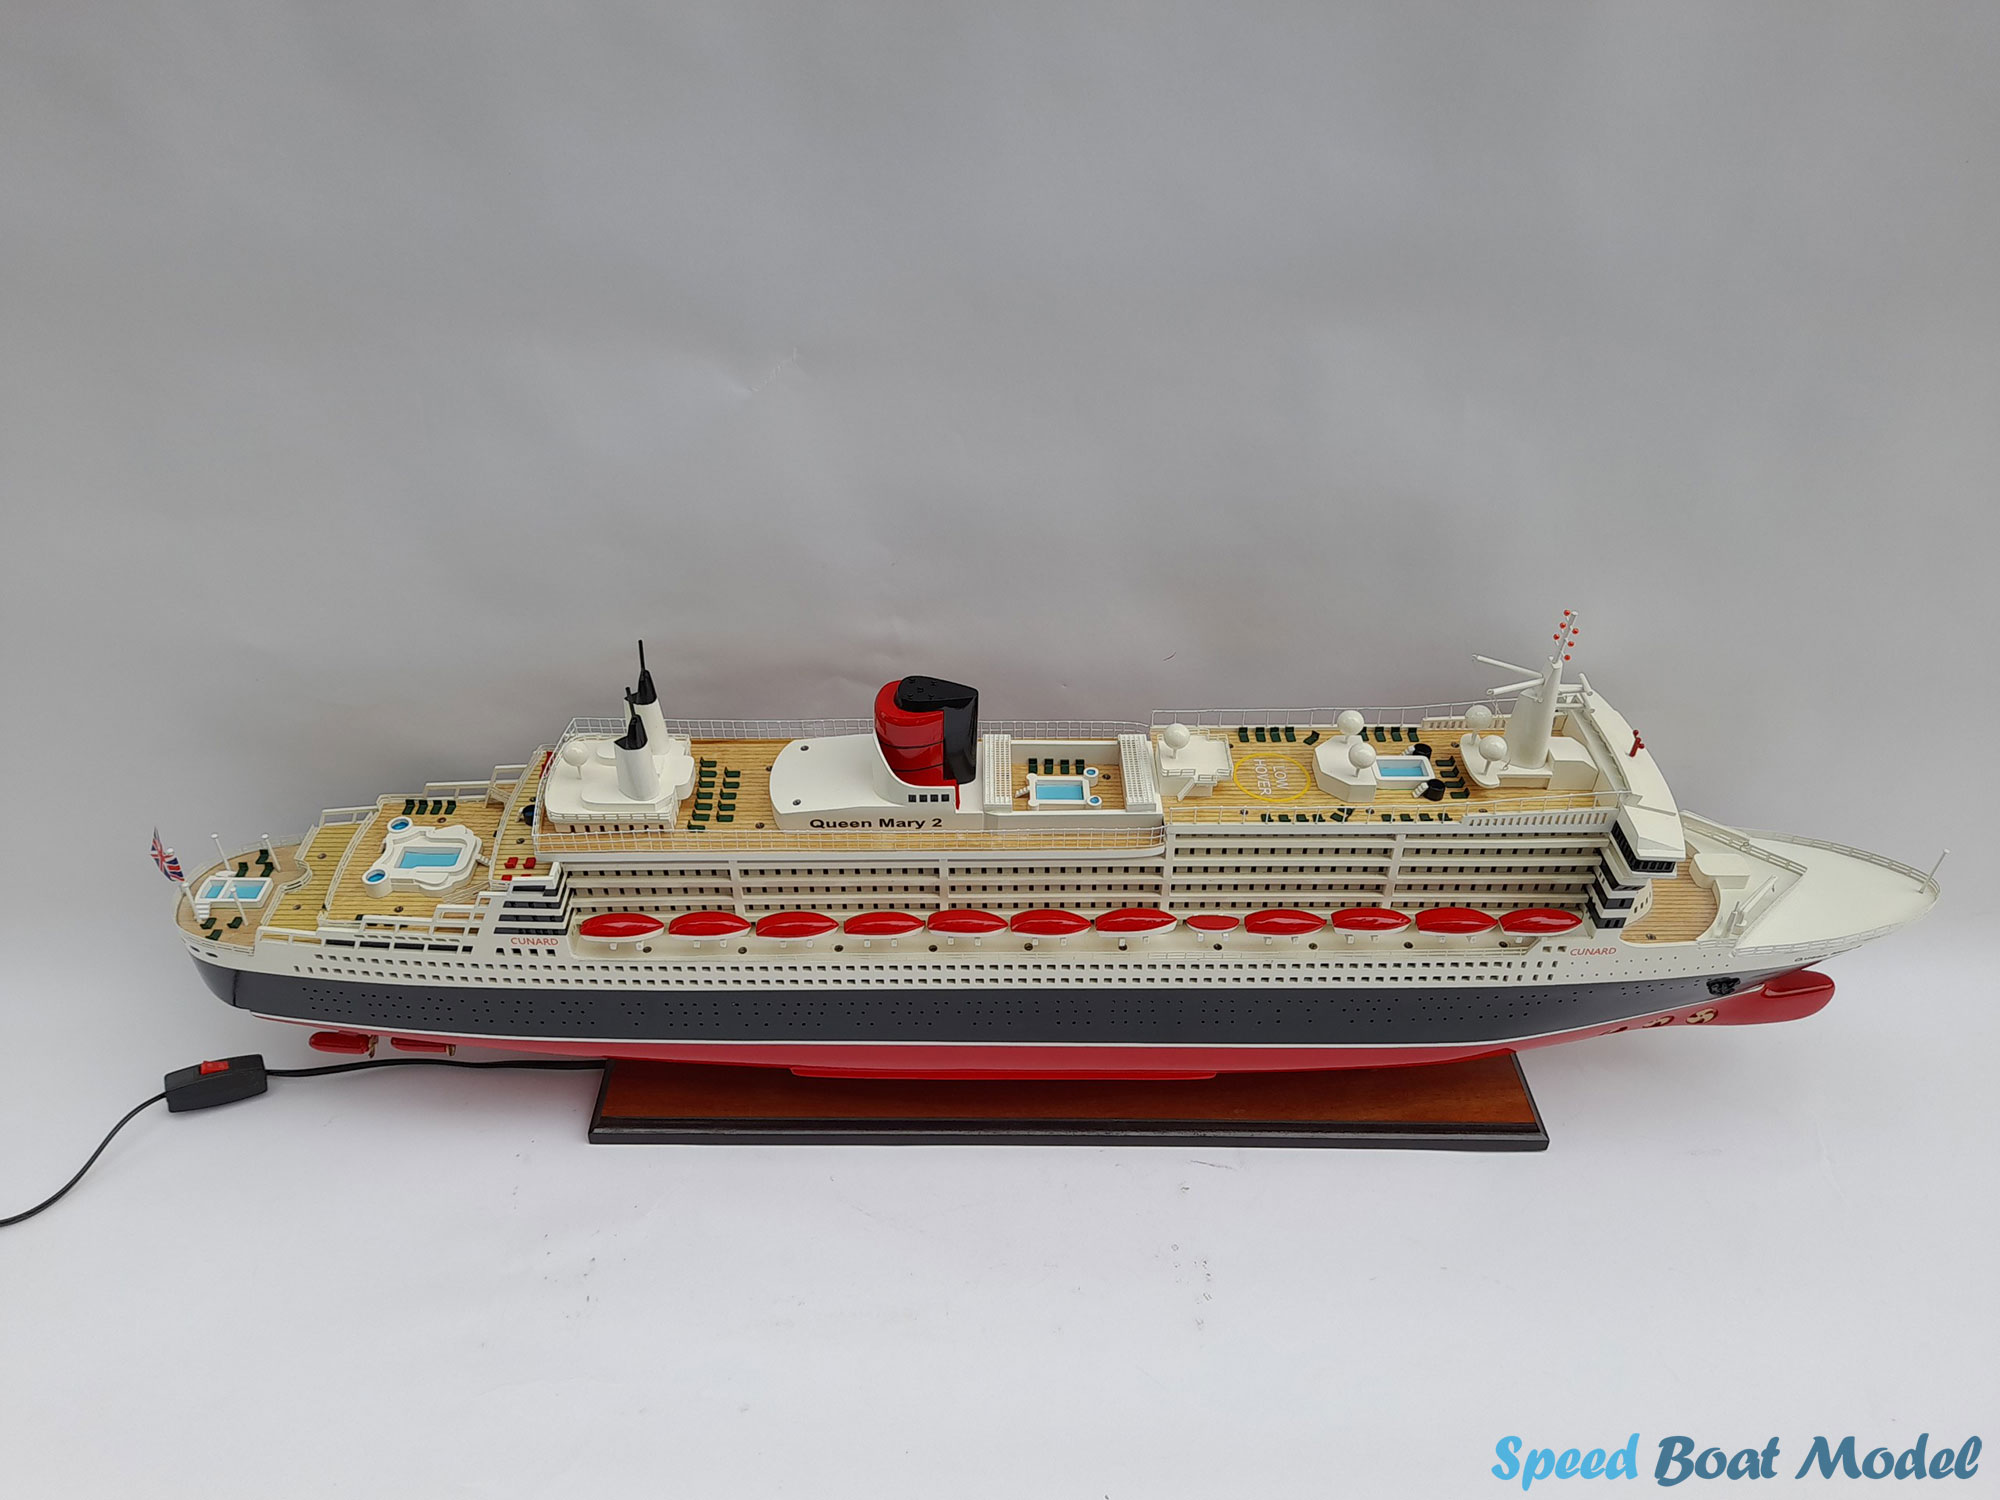 Rms Queen Mary 2 Cruise Liner Model 39.3"